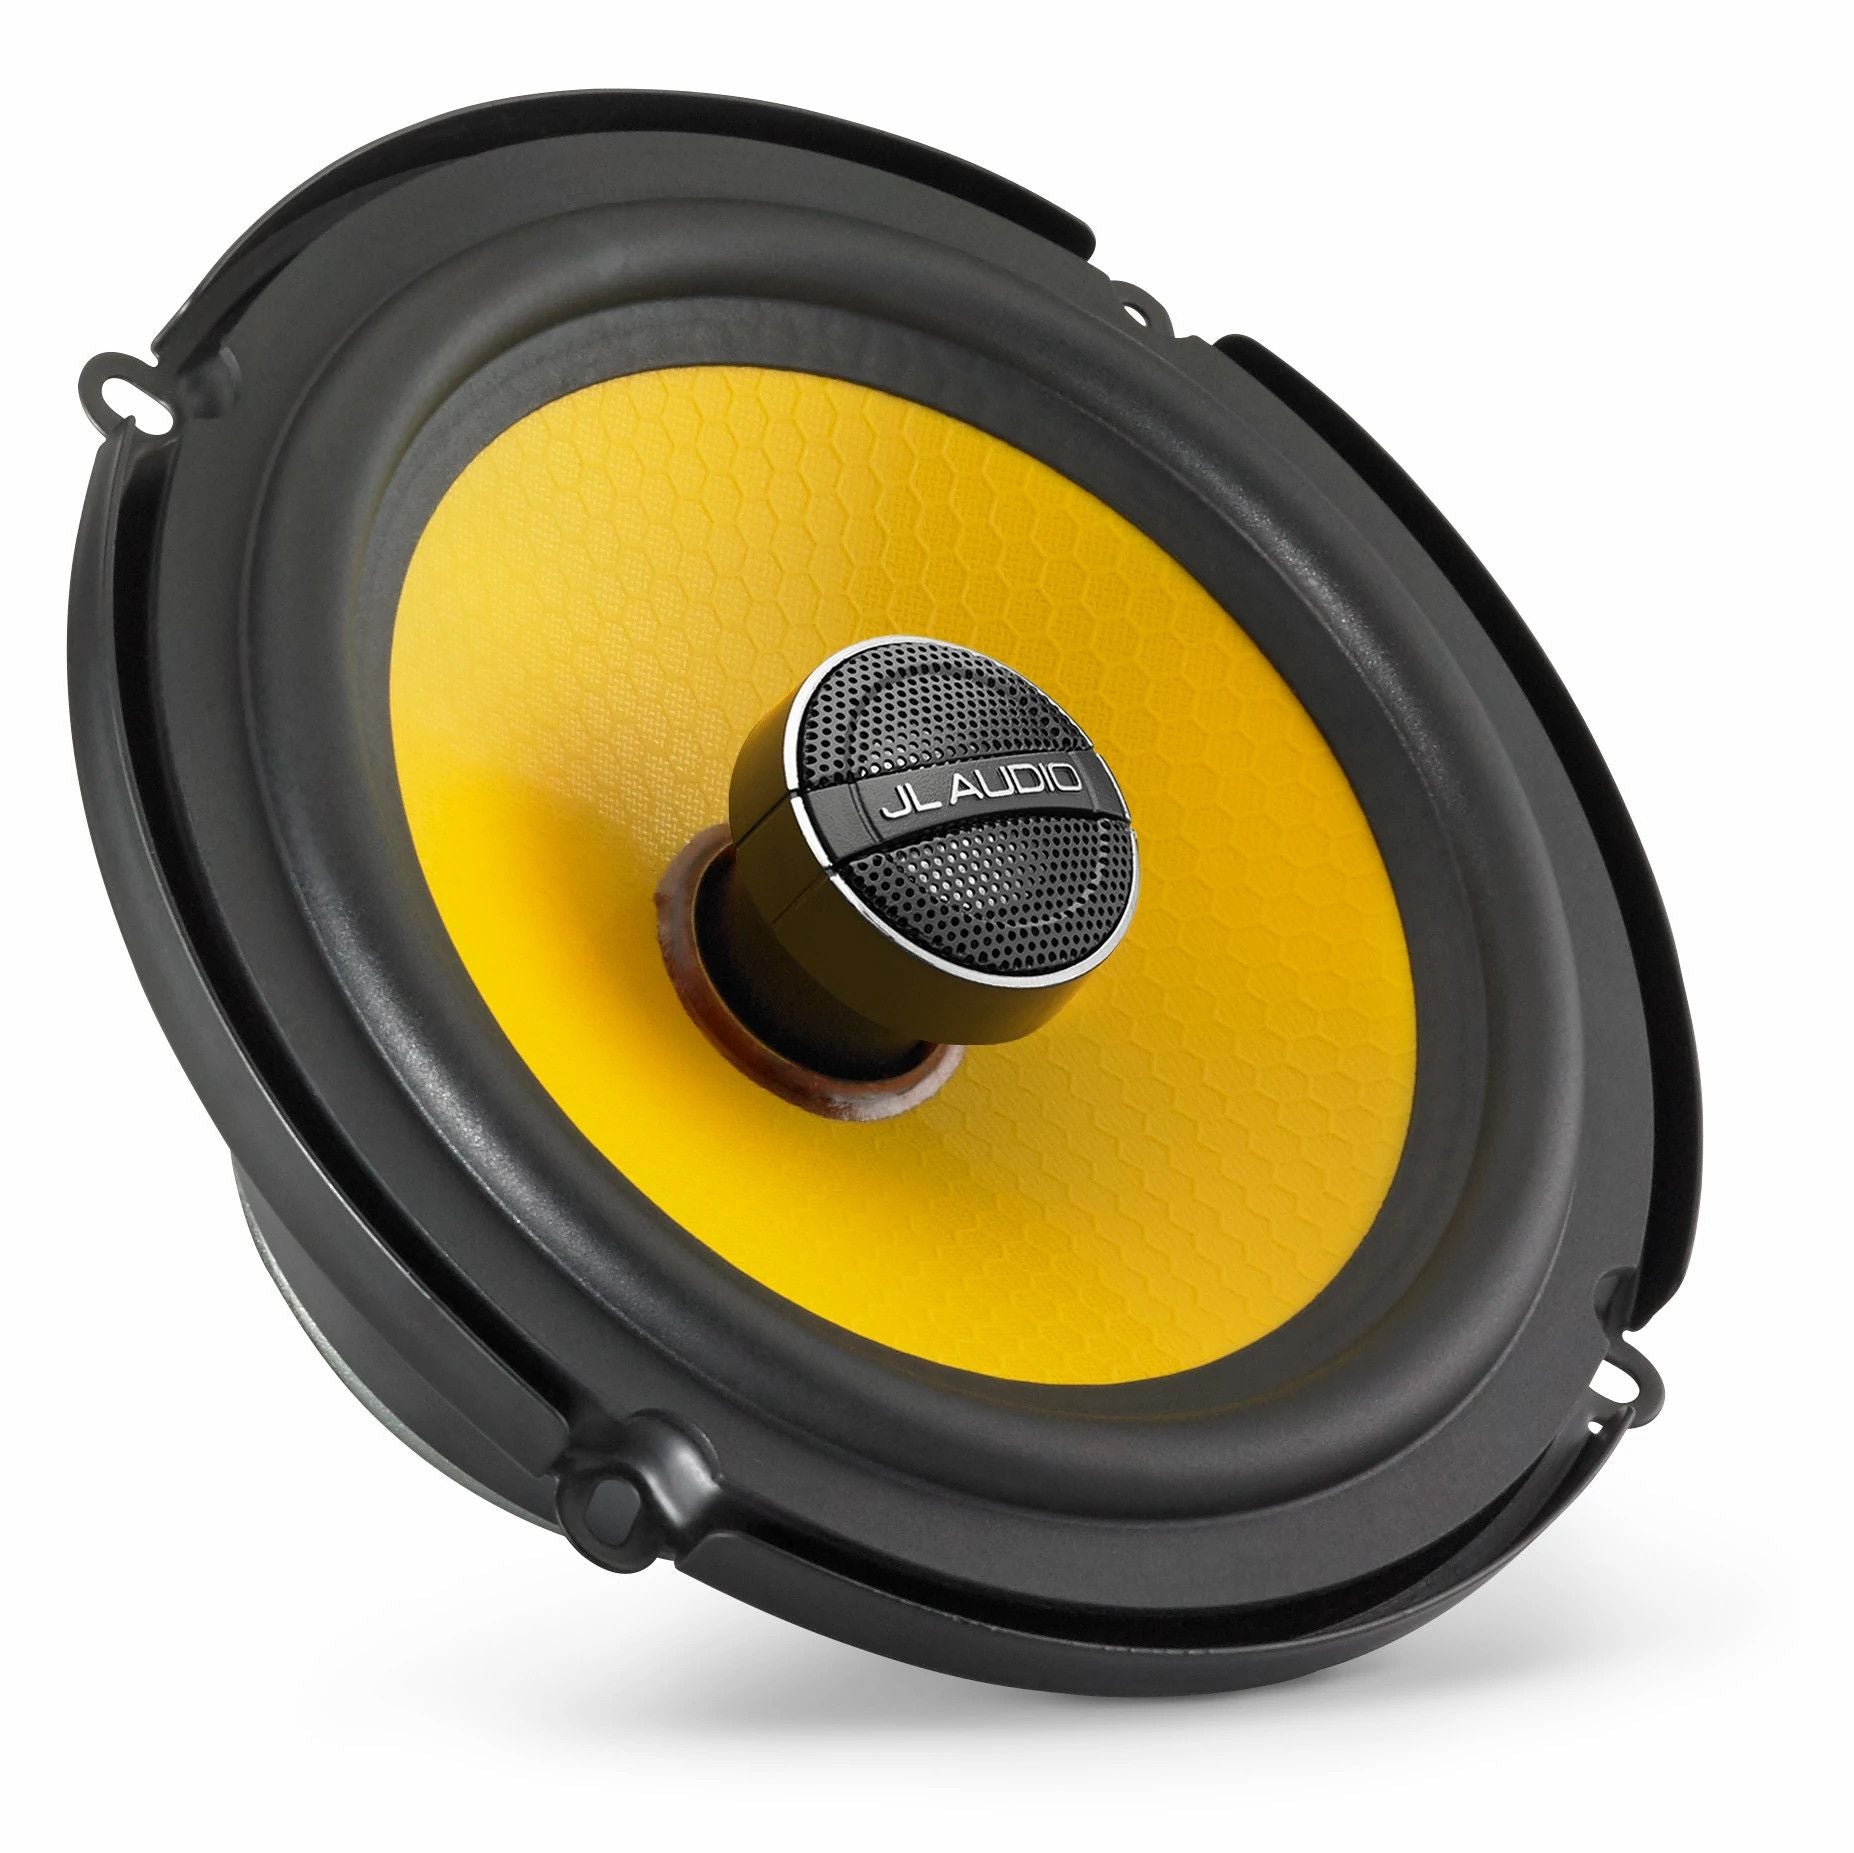 Front of C1-650x Coaxial Speaker Facing Right